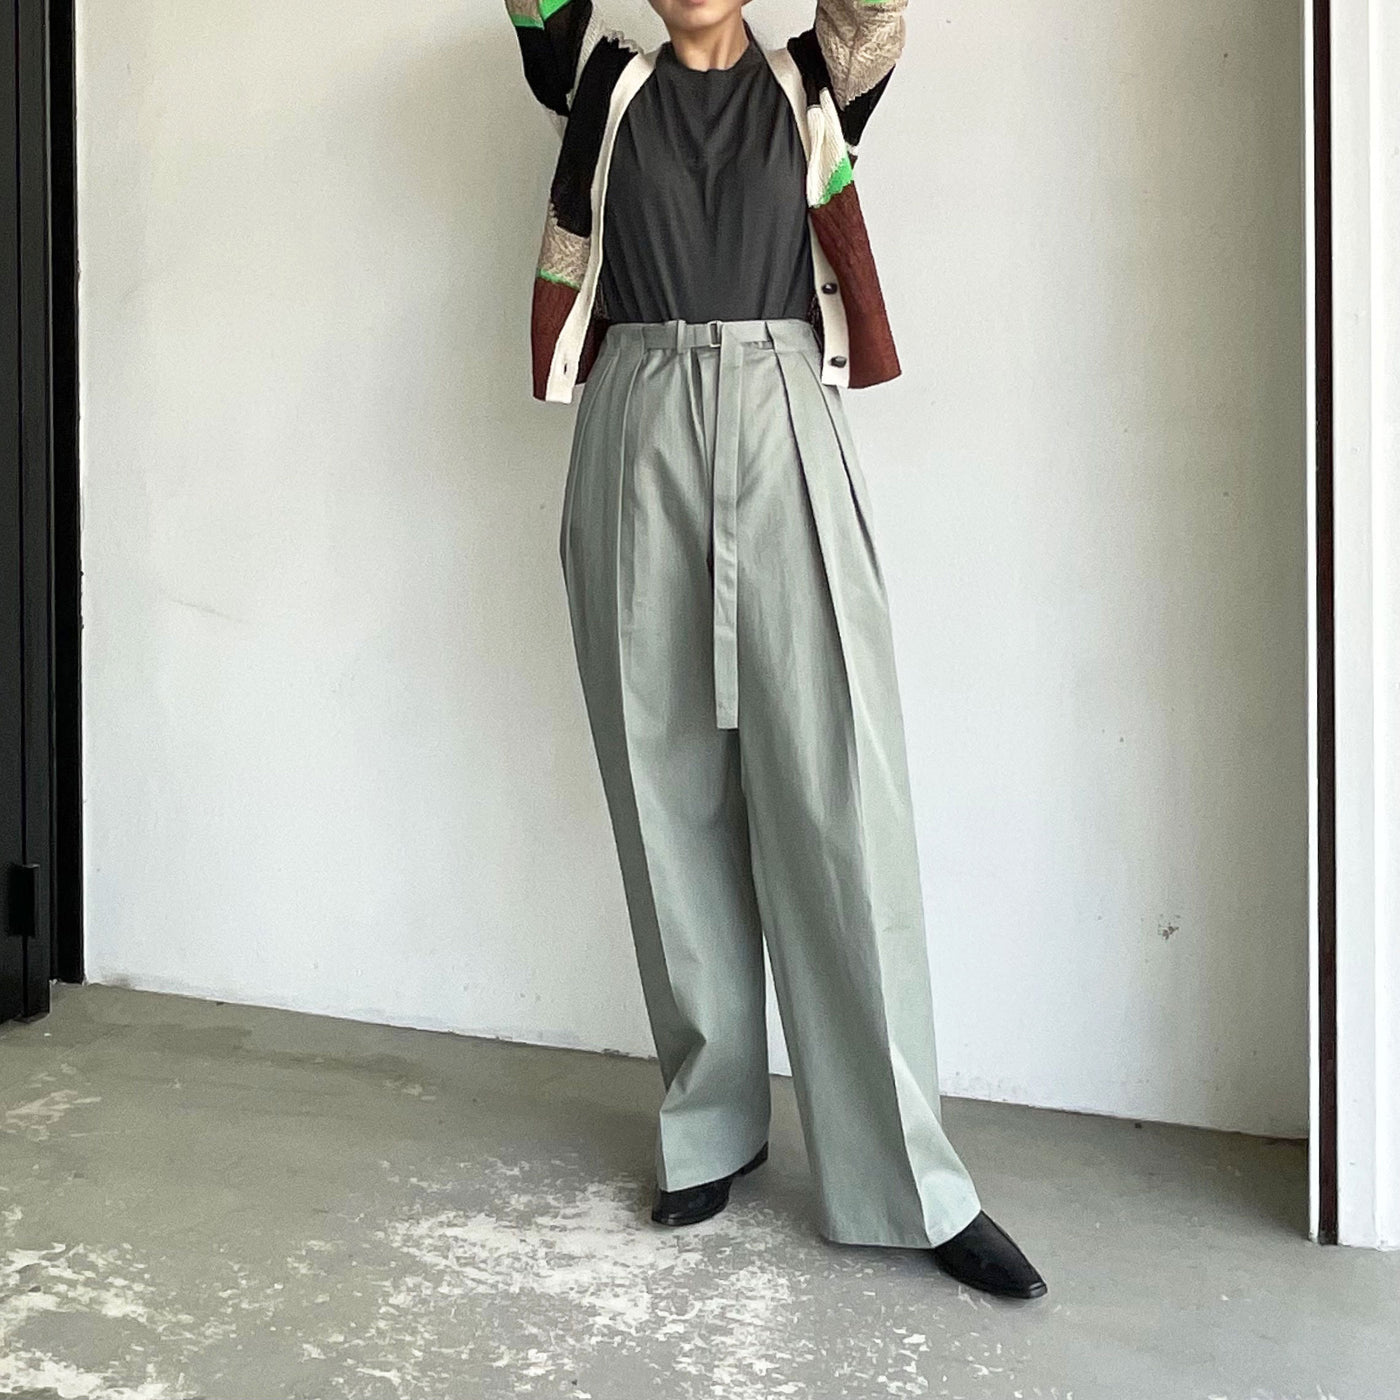 【AURALEE】WASHED FINX HERRINGBONE BELTED PANTS / EXTRA FINE WOOL JERSEY TEE【MURRAL】 Pottery knit cardigan